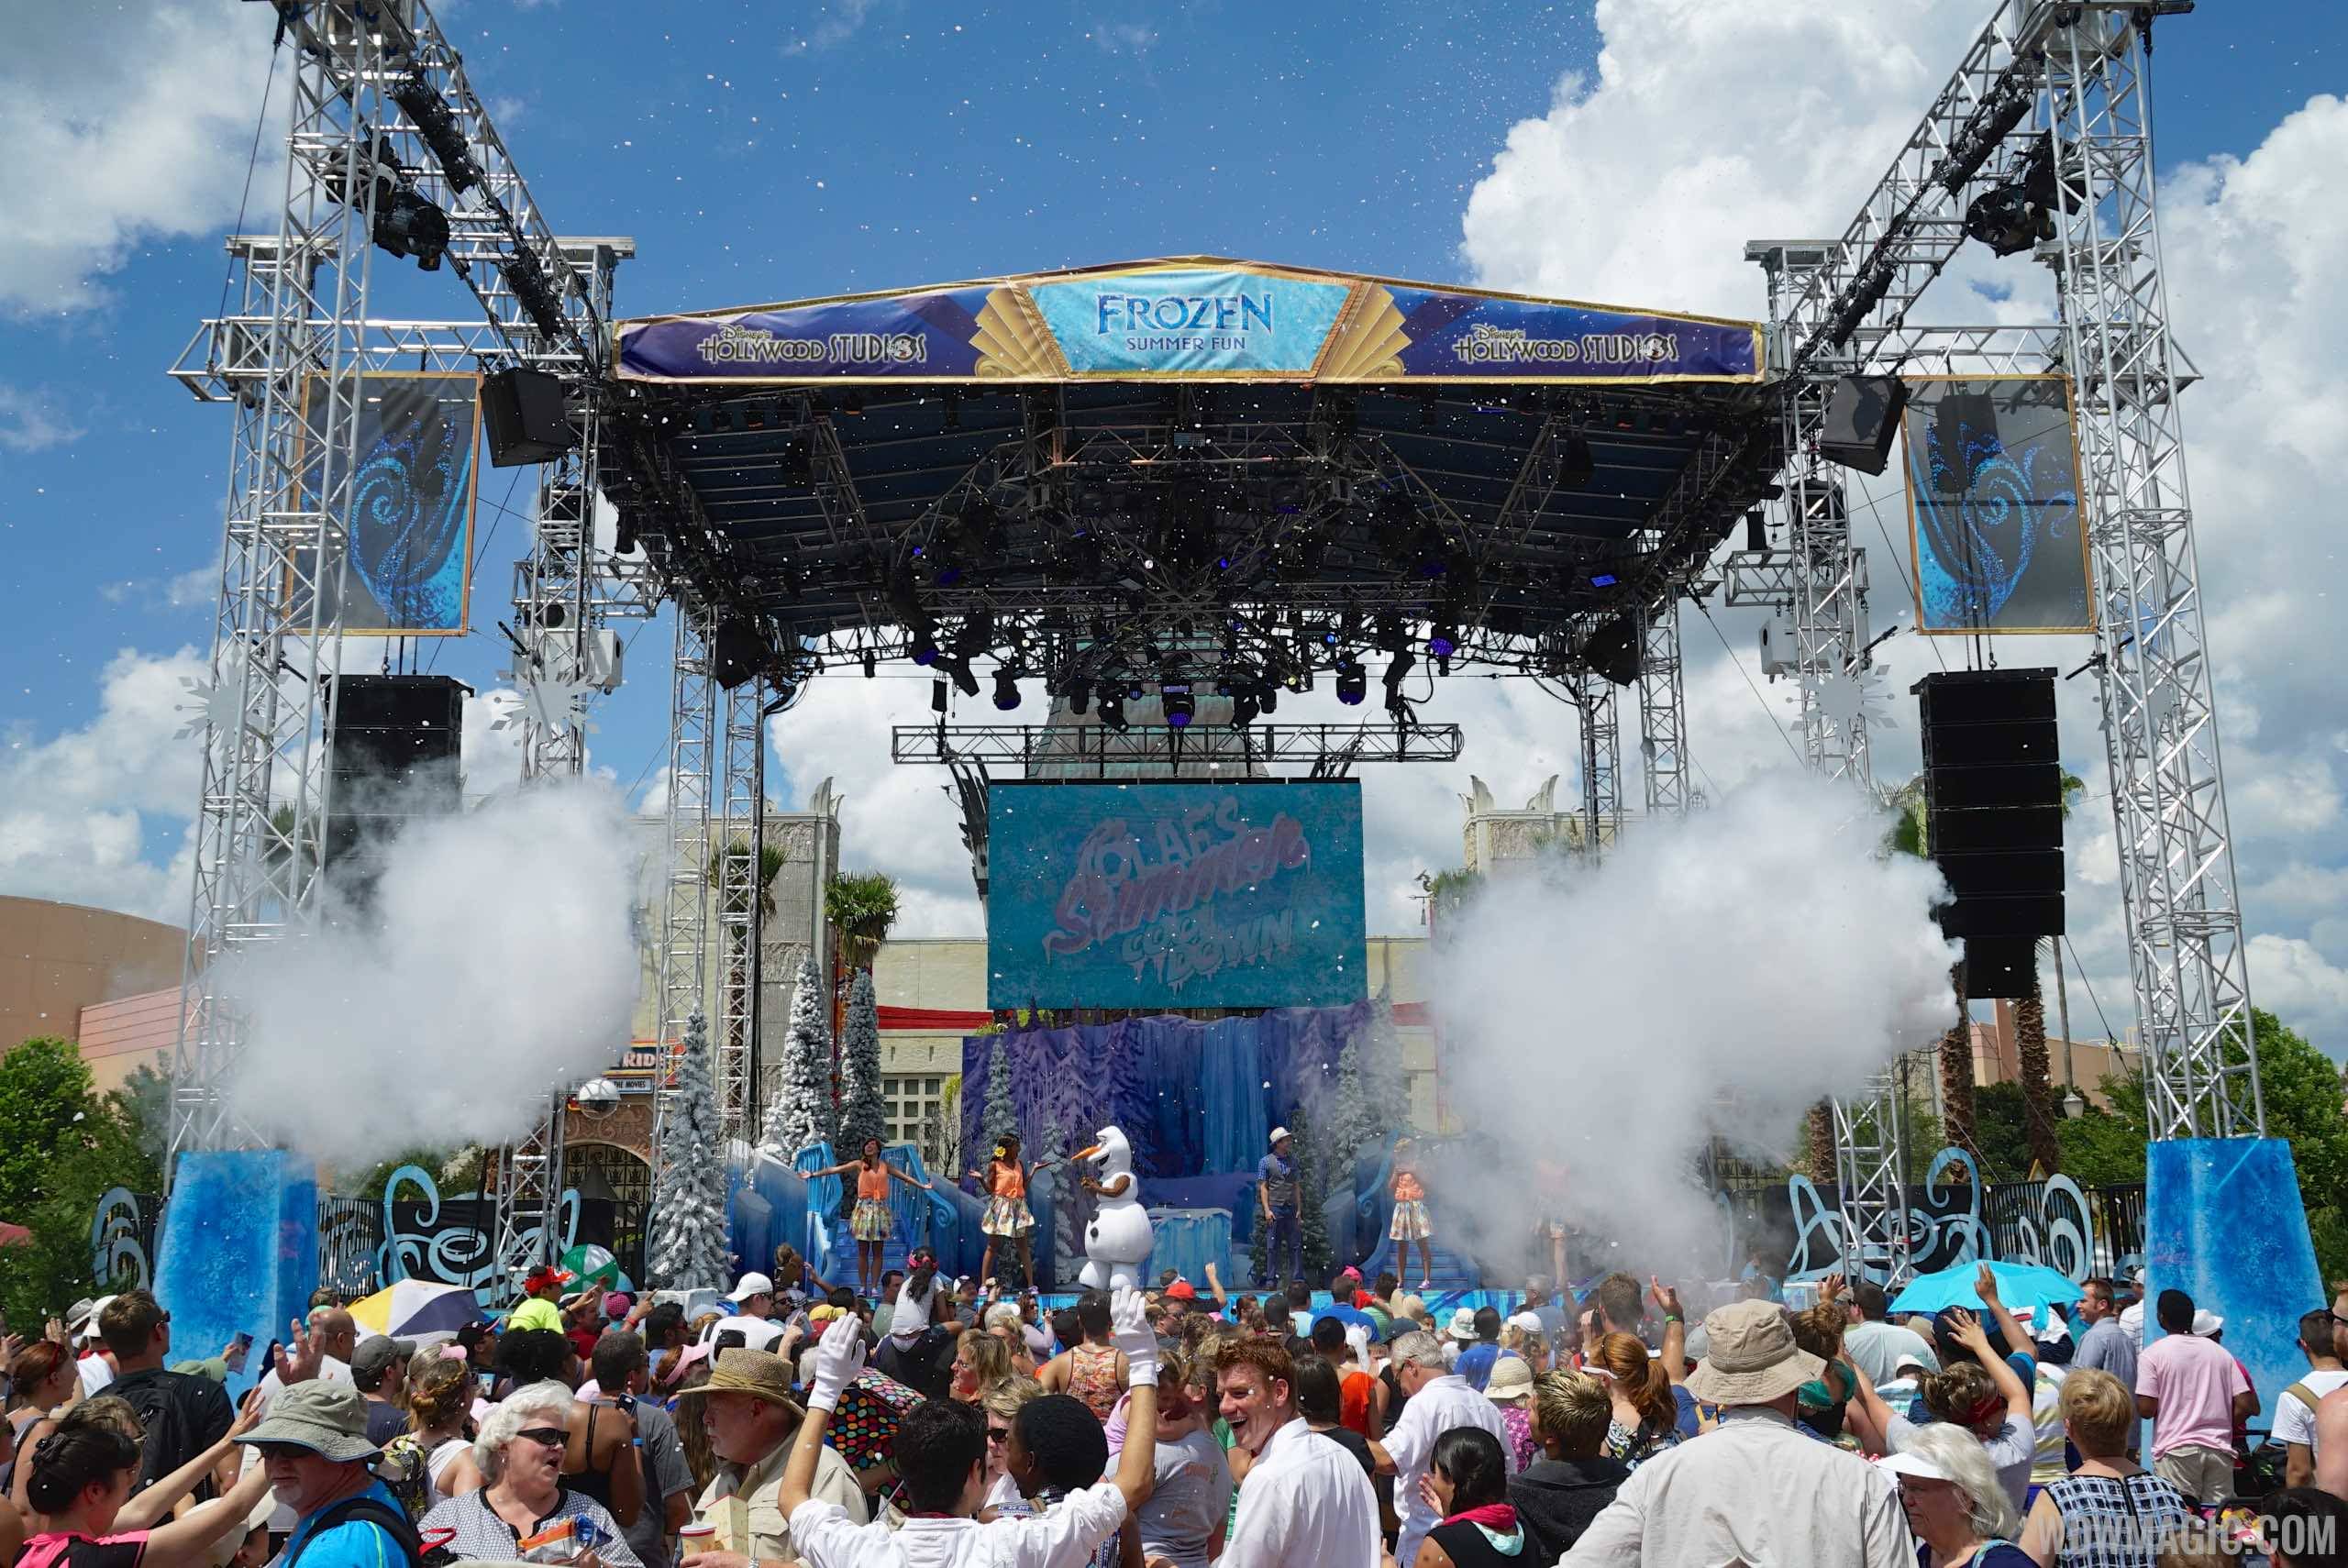 VIDEO - New pyro design for this year's Frozen Fireworks at Disney's Hollywood Studios